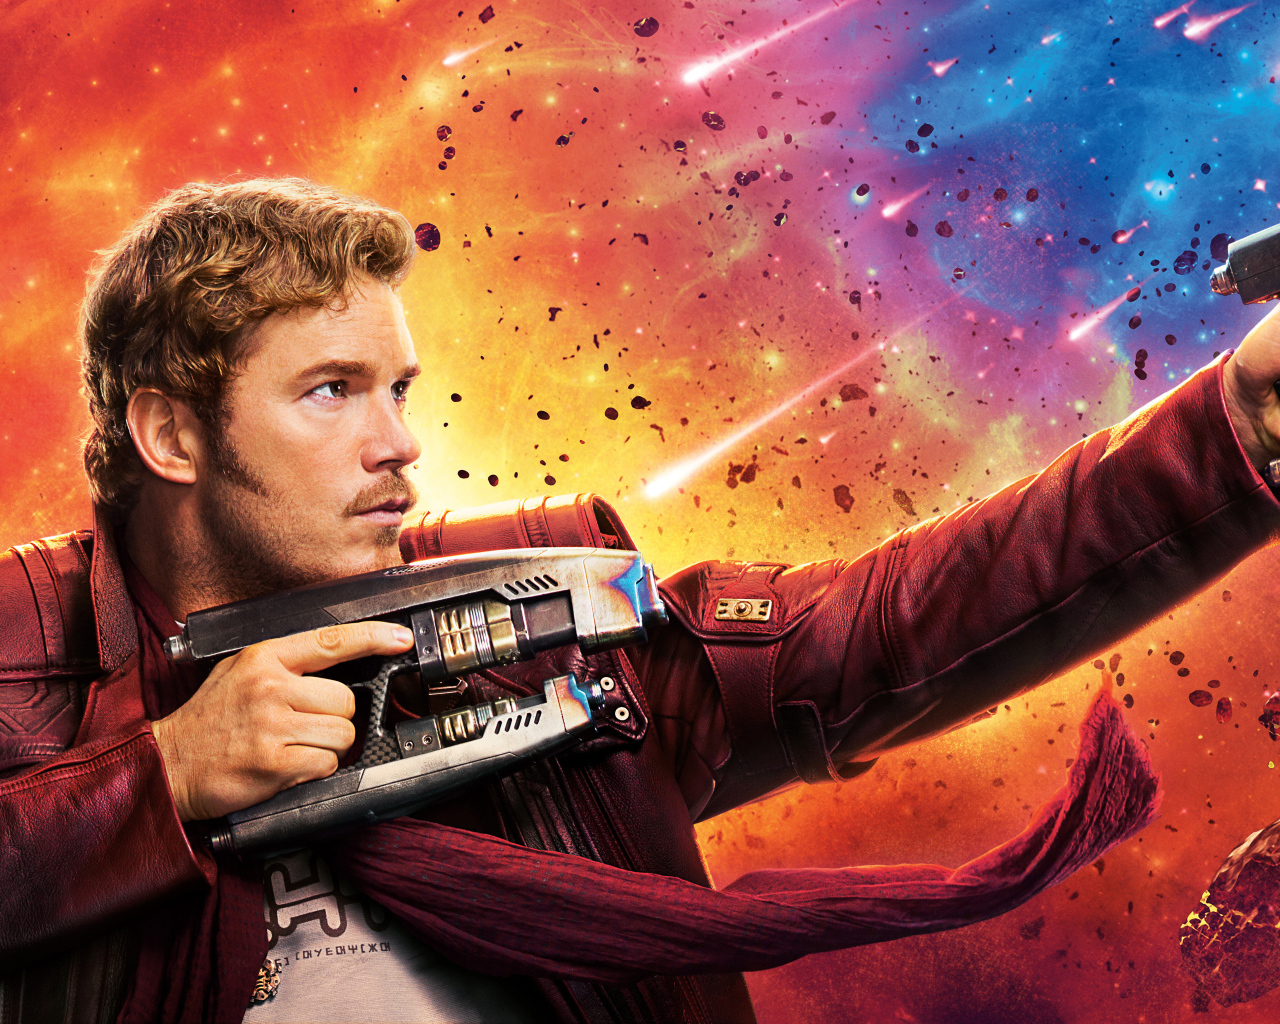 Star Lord the hero of the film The Guardians of the Galaxy 2